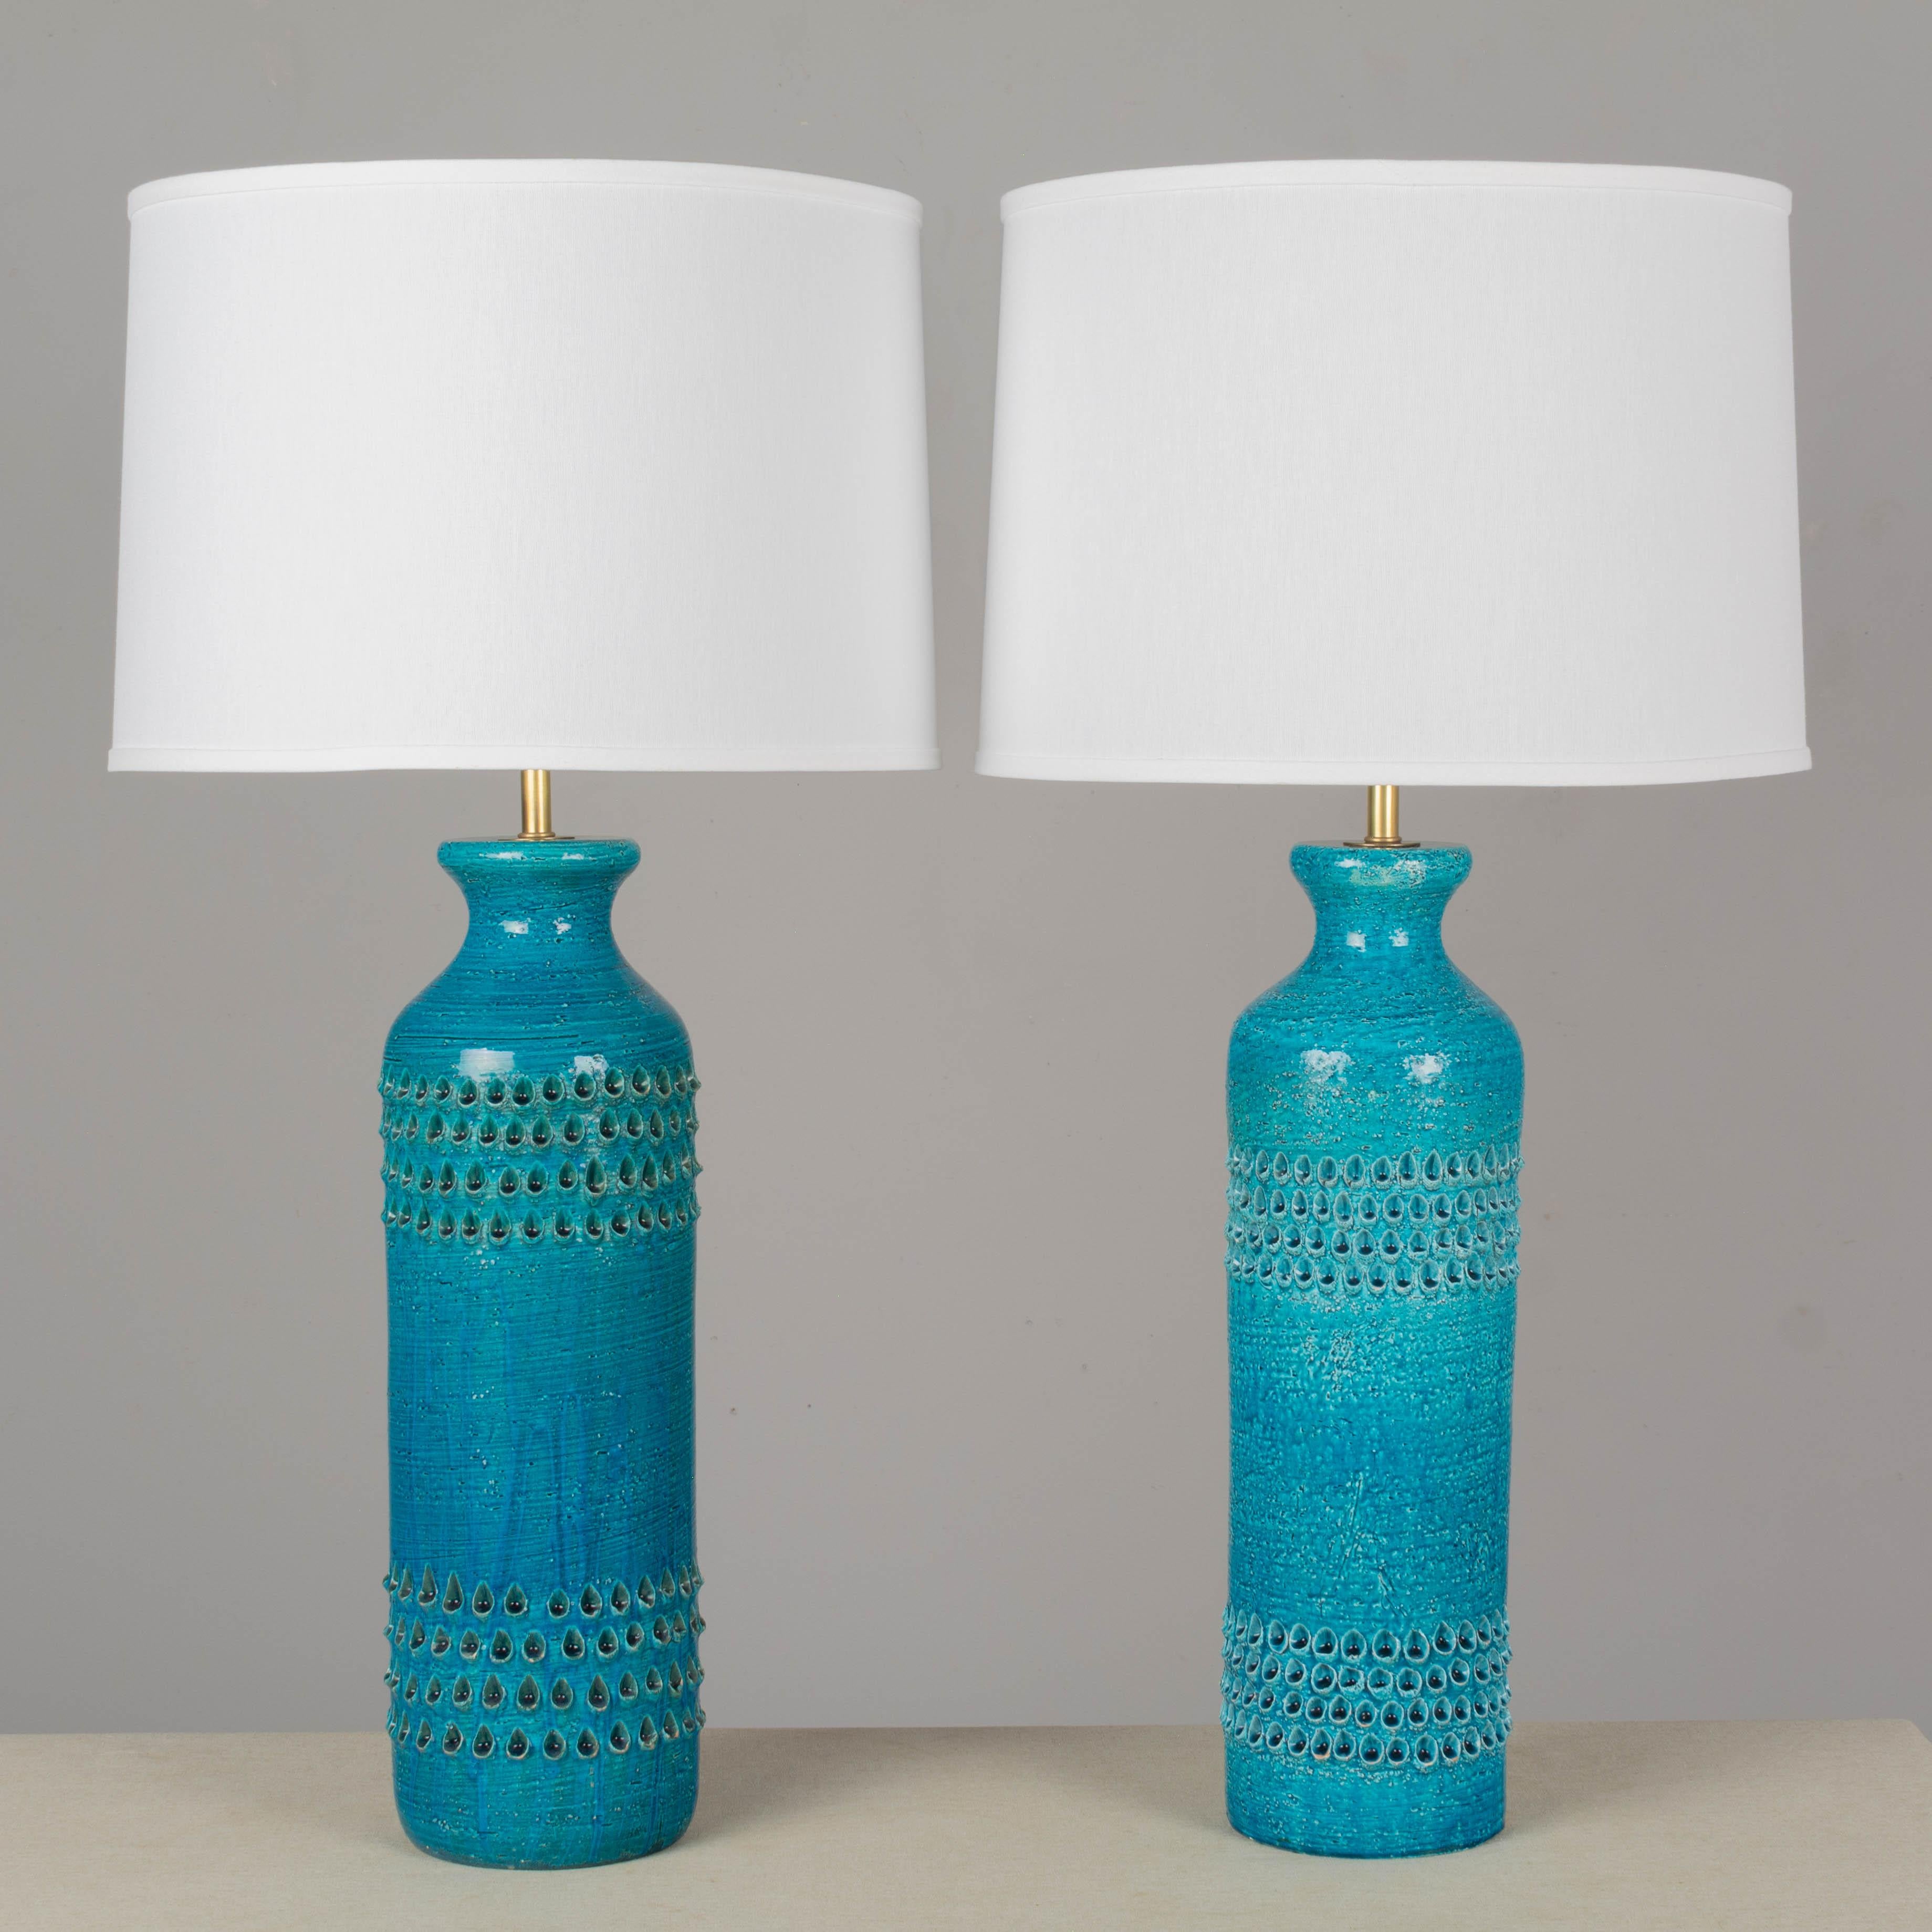 A pair of Bitossi ceramic table lamps by Aldo Londi with deep turquoise Rimini blue glaze. Large scale chunky pottery decorated in Lacrima pattern of impressed textured teardrops. Minor loss to some of the relief, one lamp with chip to bottom edge.